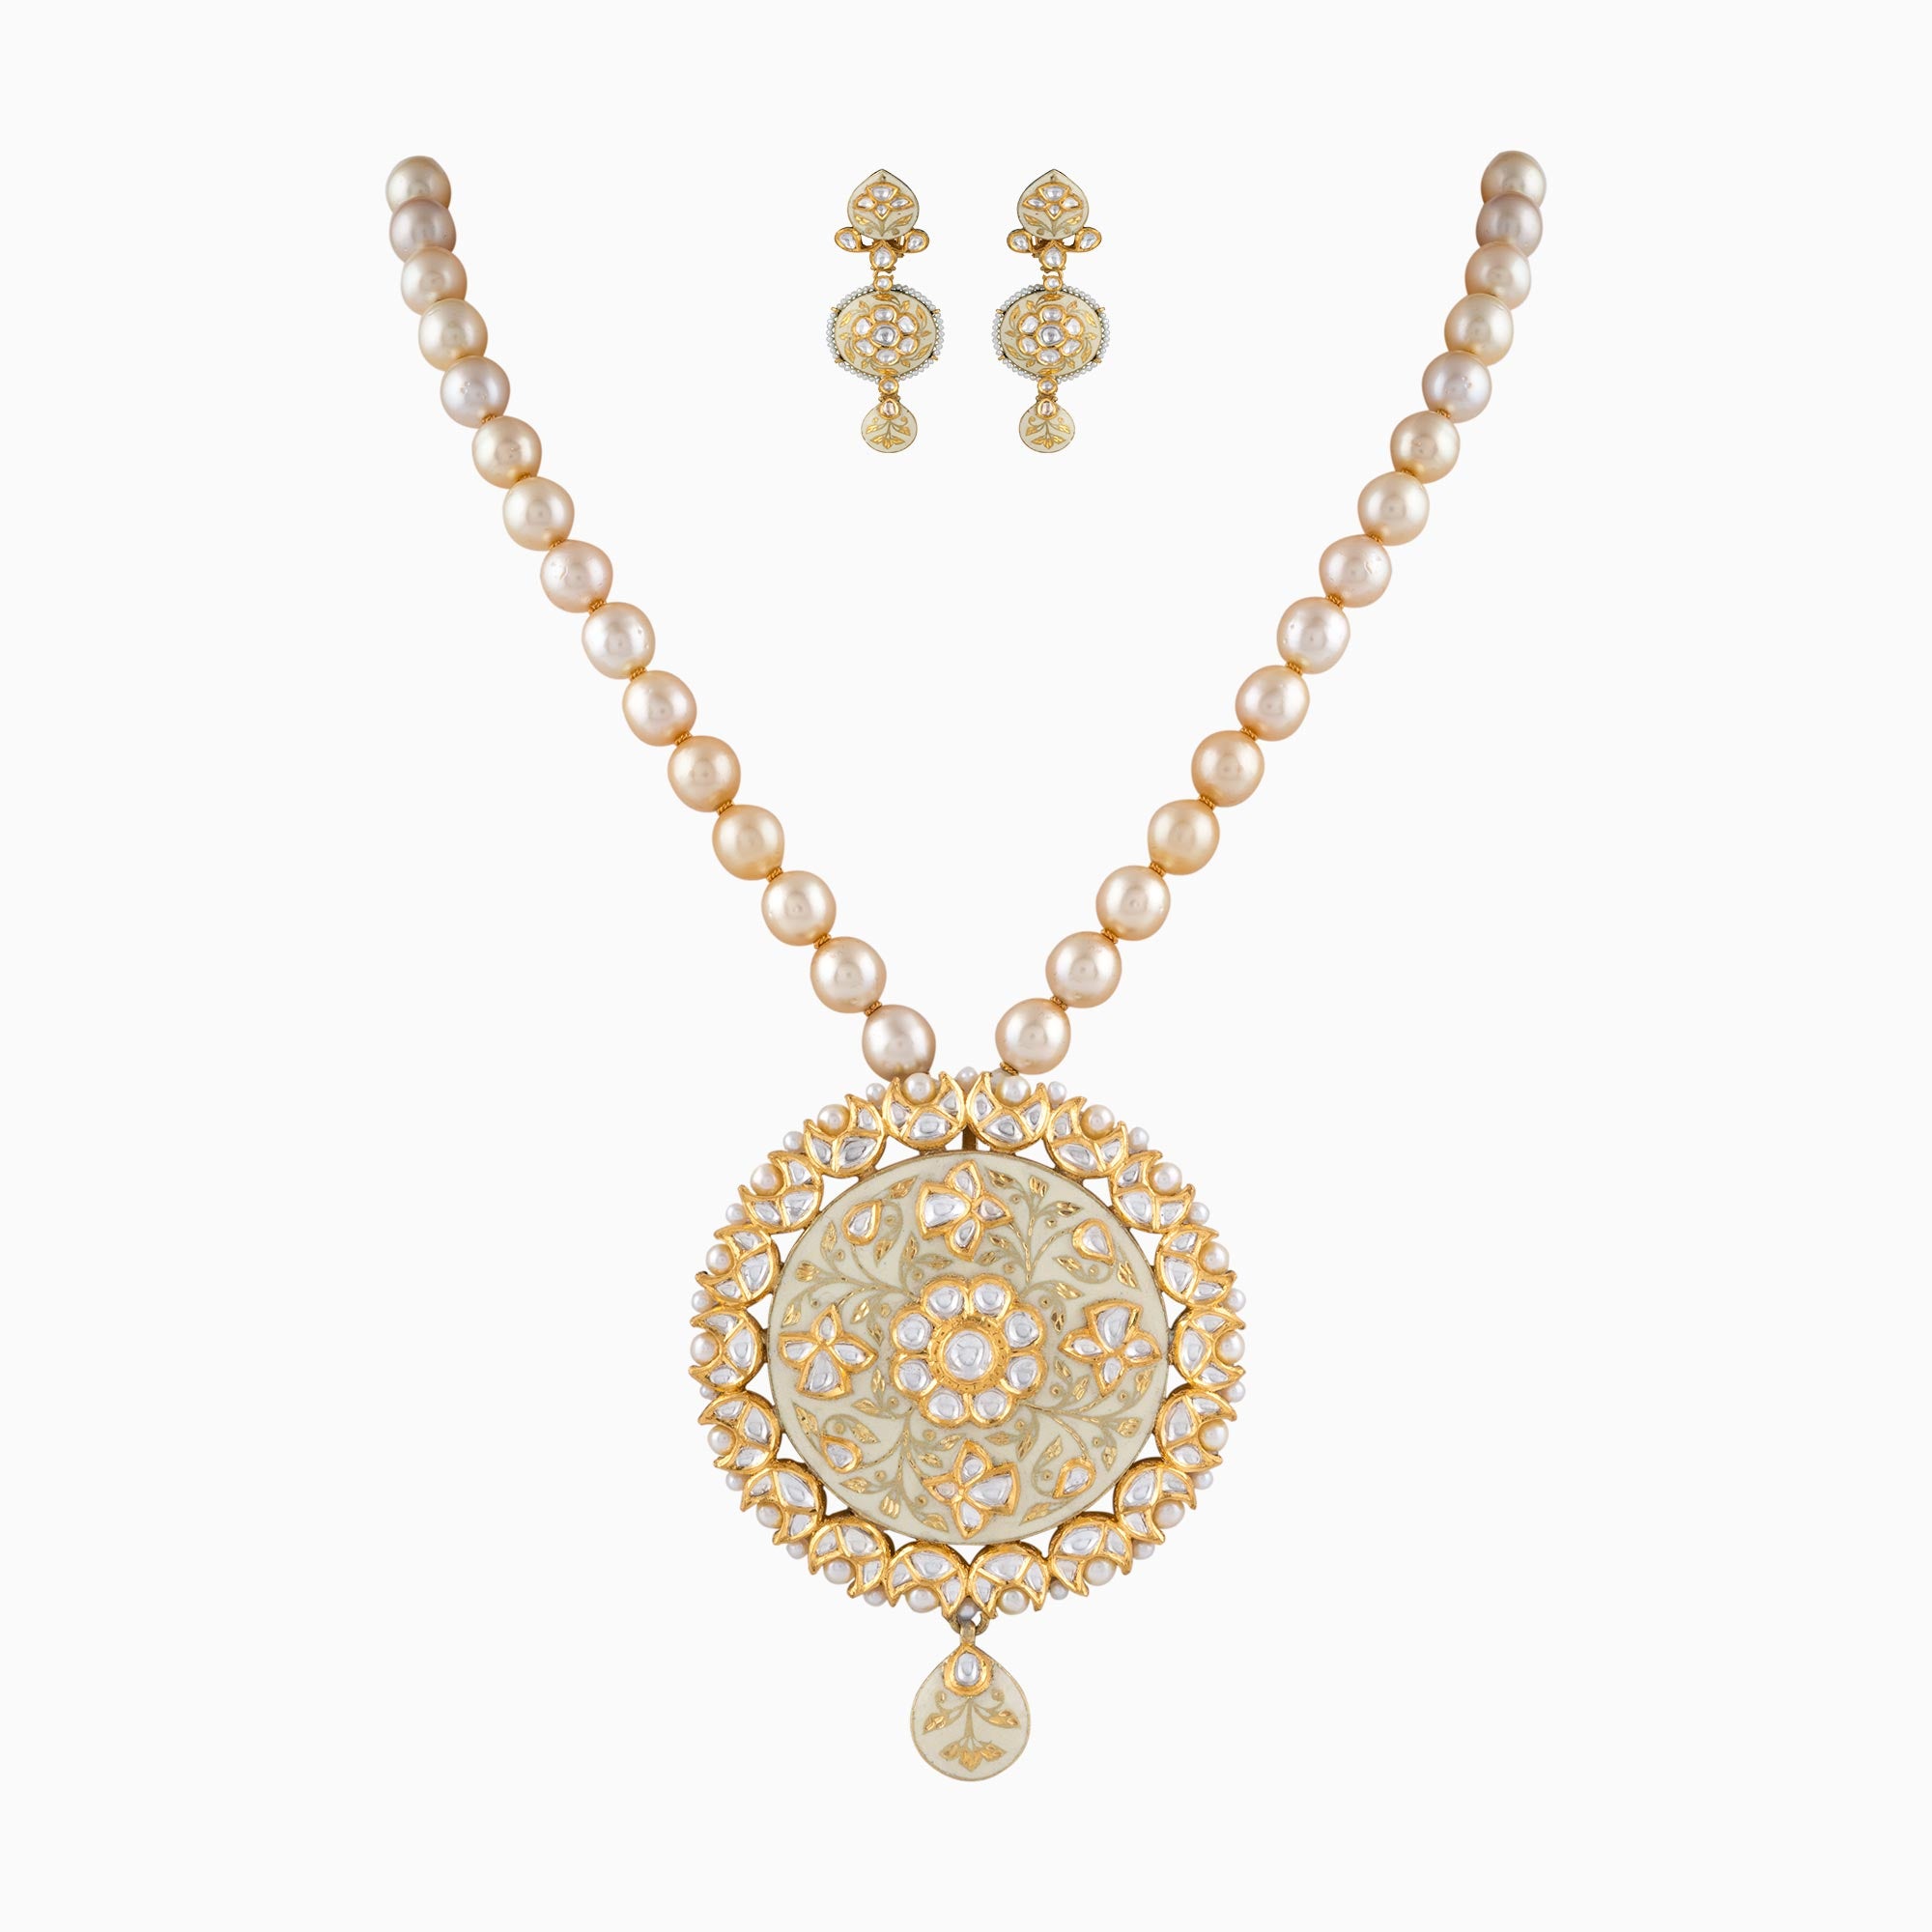 Pendant Yellow Meena with Uncut Polki Diamond, S.S. Pearls and Japanese Pearls-KMPE1101